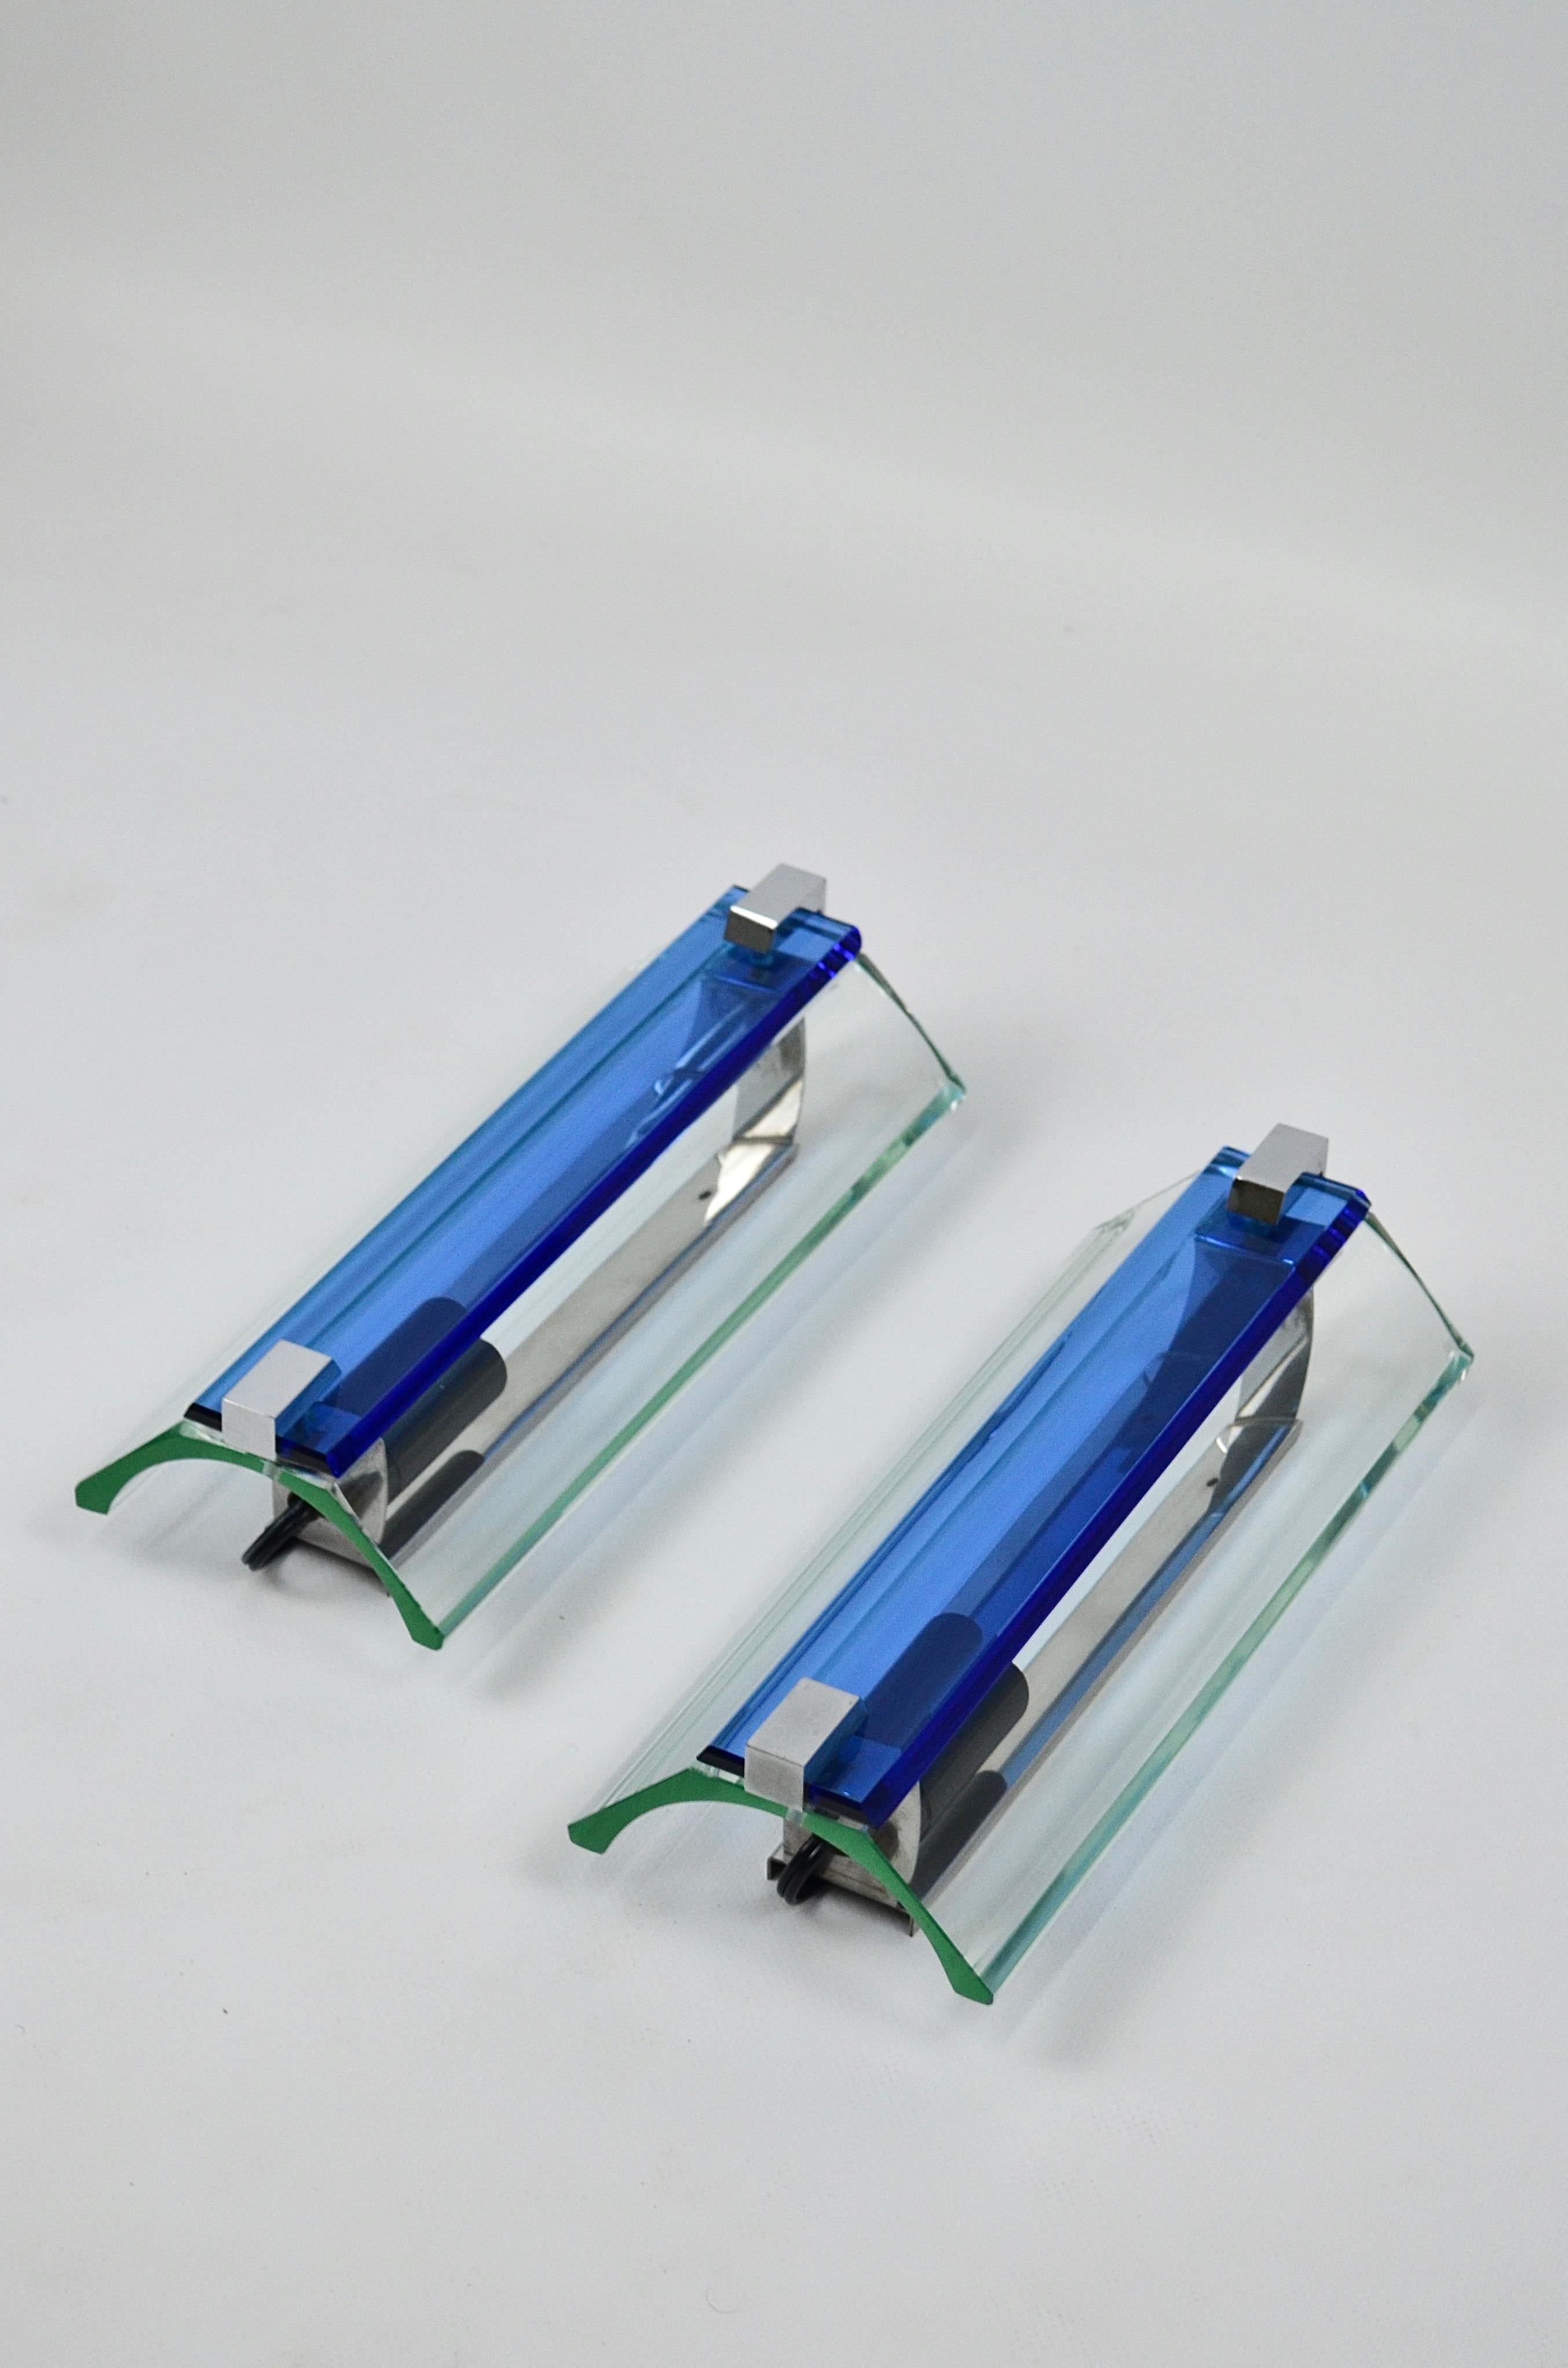 Superb Italian wall lights in blue and transparent glass by Veca, 1960s.
The two wall lights work and diffuse a soft and pleasant light.
Beautiful design and very good condition.
Presence of Veca labels on the back of the wall lights